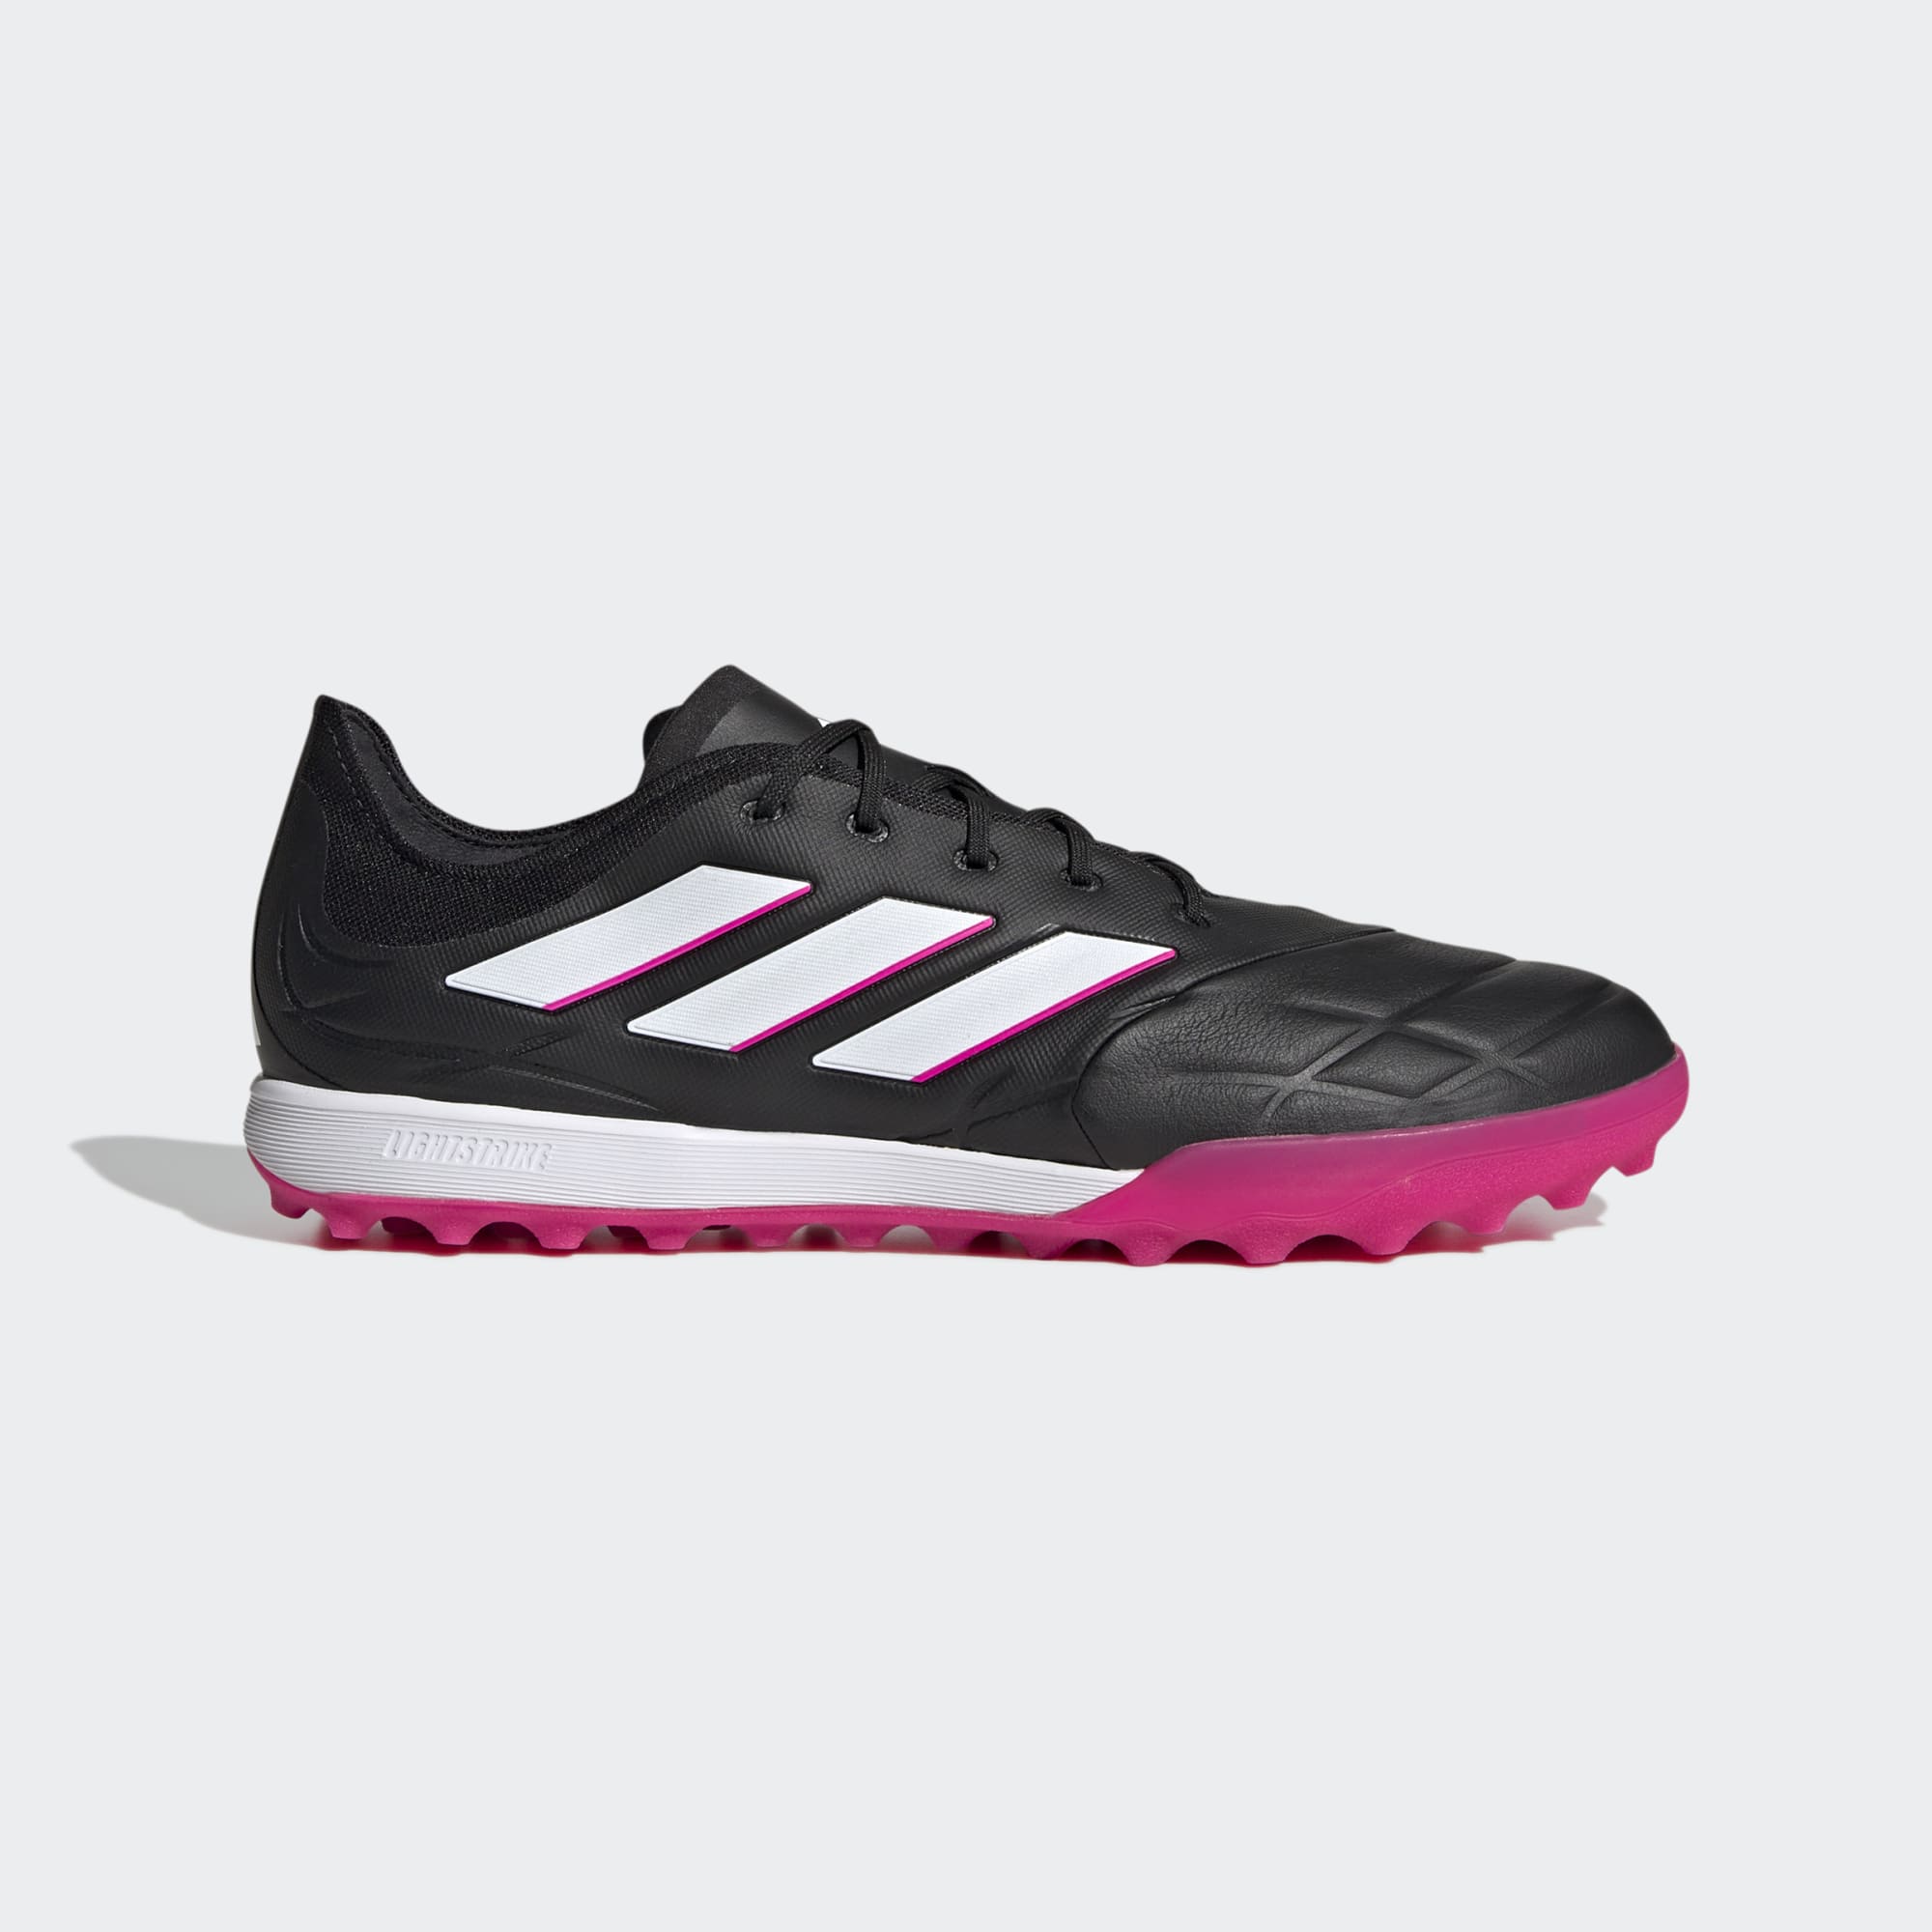 adidas COPA PURE.1 TURF SOCCER SHOES